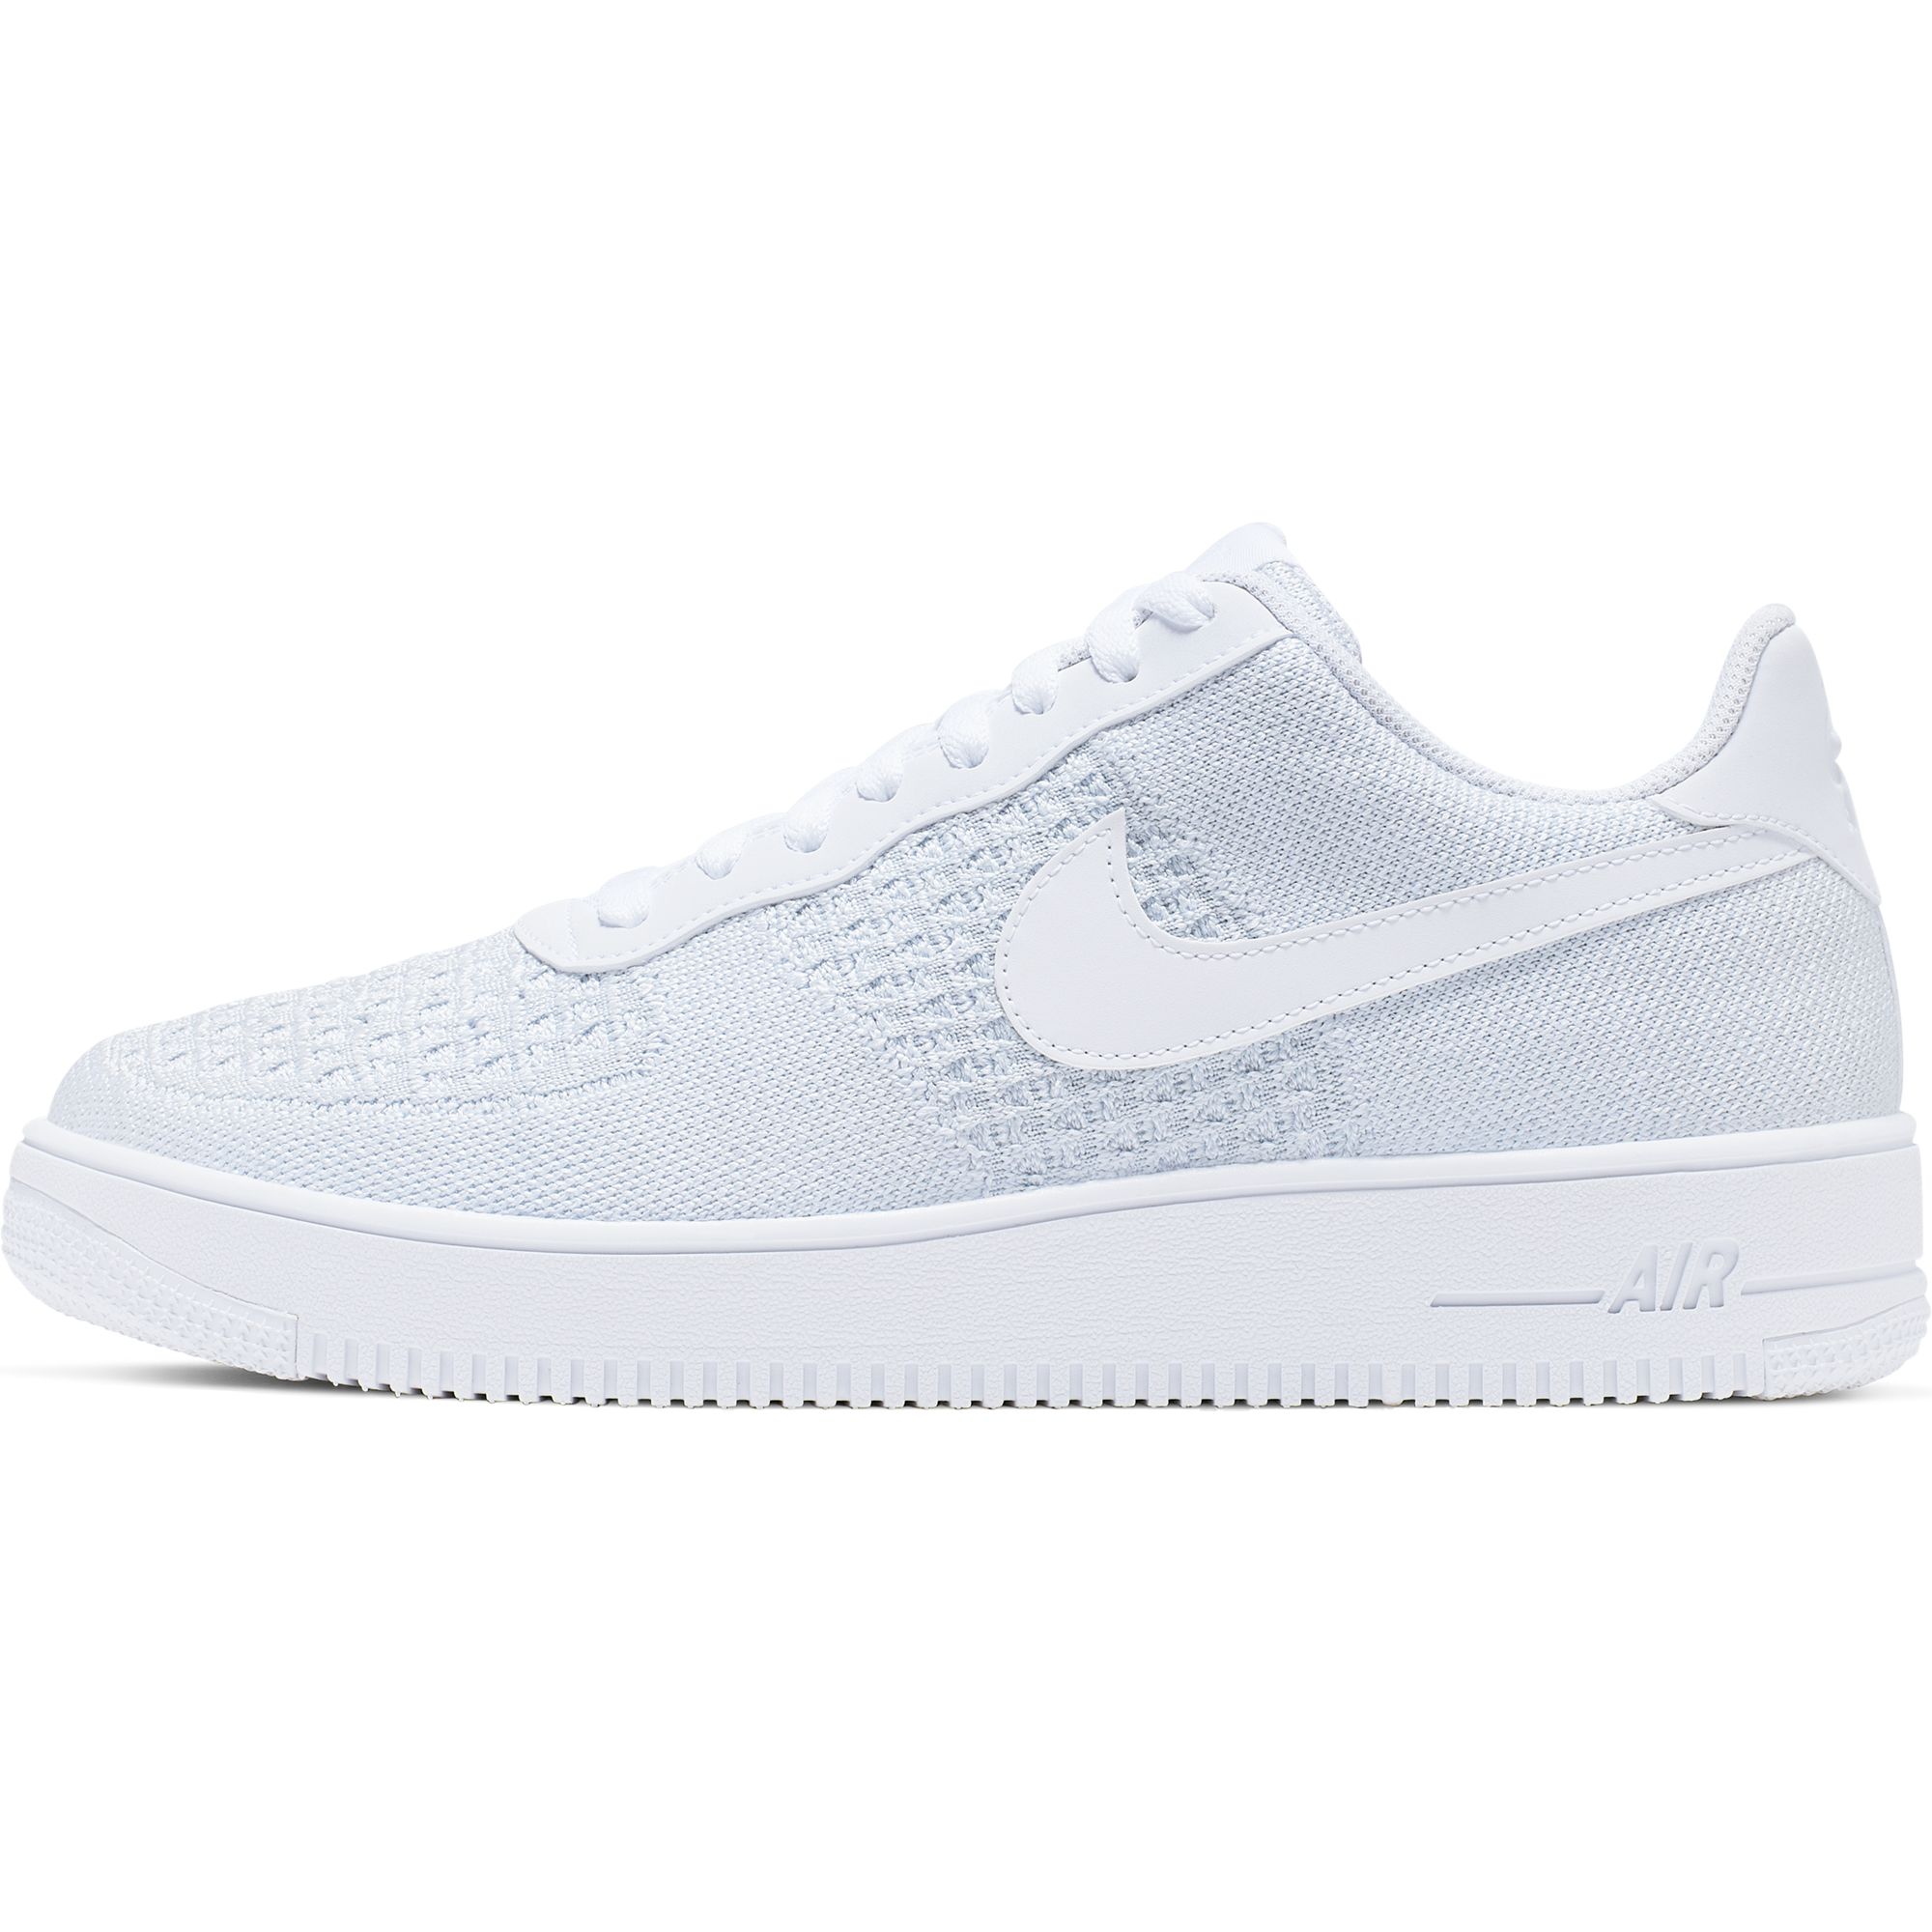 nike air force 1 flyknit 2.0 $110